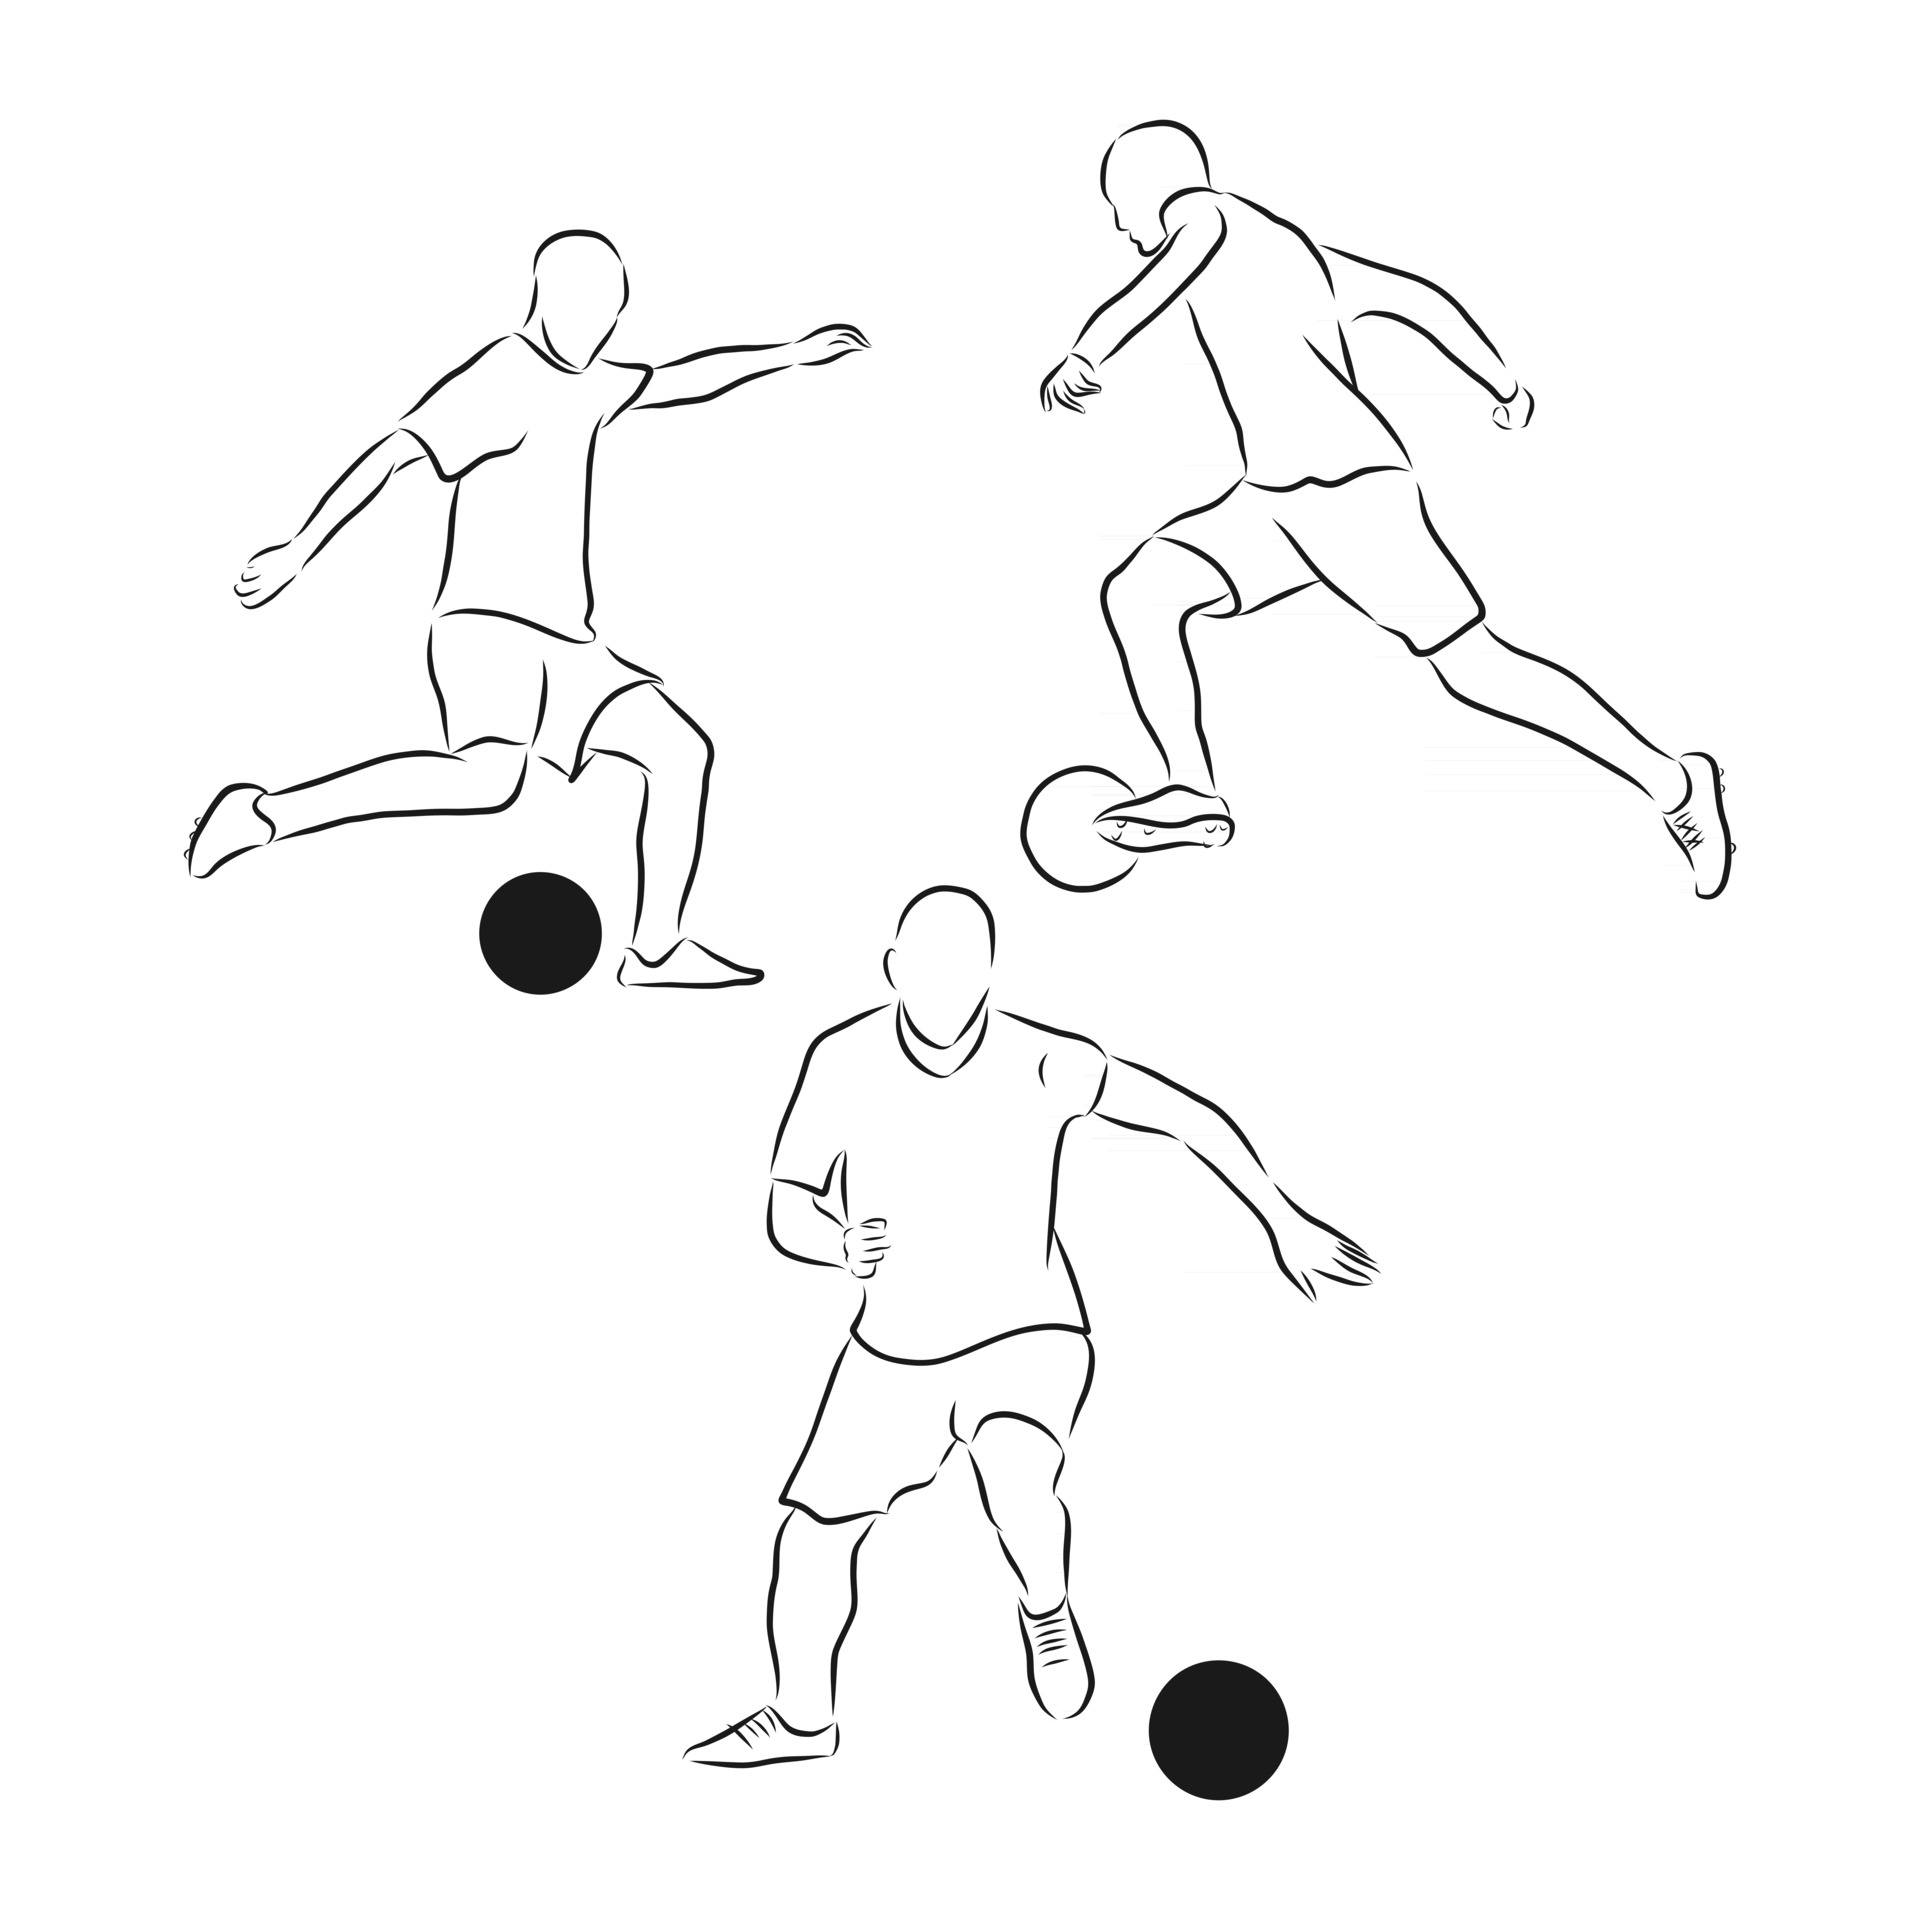 Amazon.com: Sketch Soccer Ball Drawing Canvas Art Poster and Wall Art  Picture Print Modern Family Bedroom Decor Posters 12x12inch(30x30cm) : לבית  ולמטבח